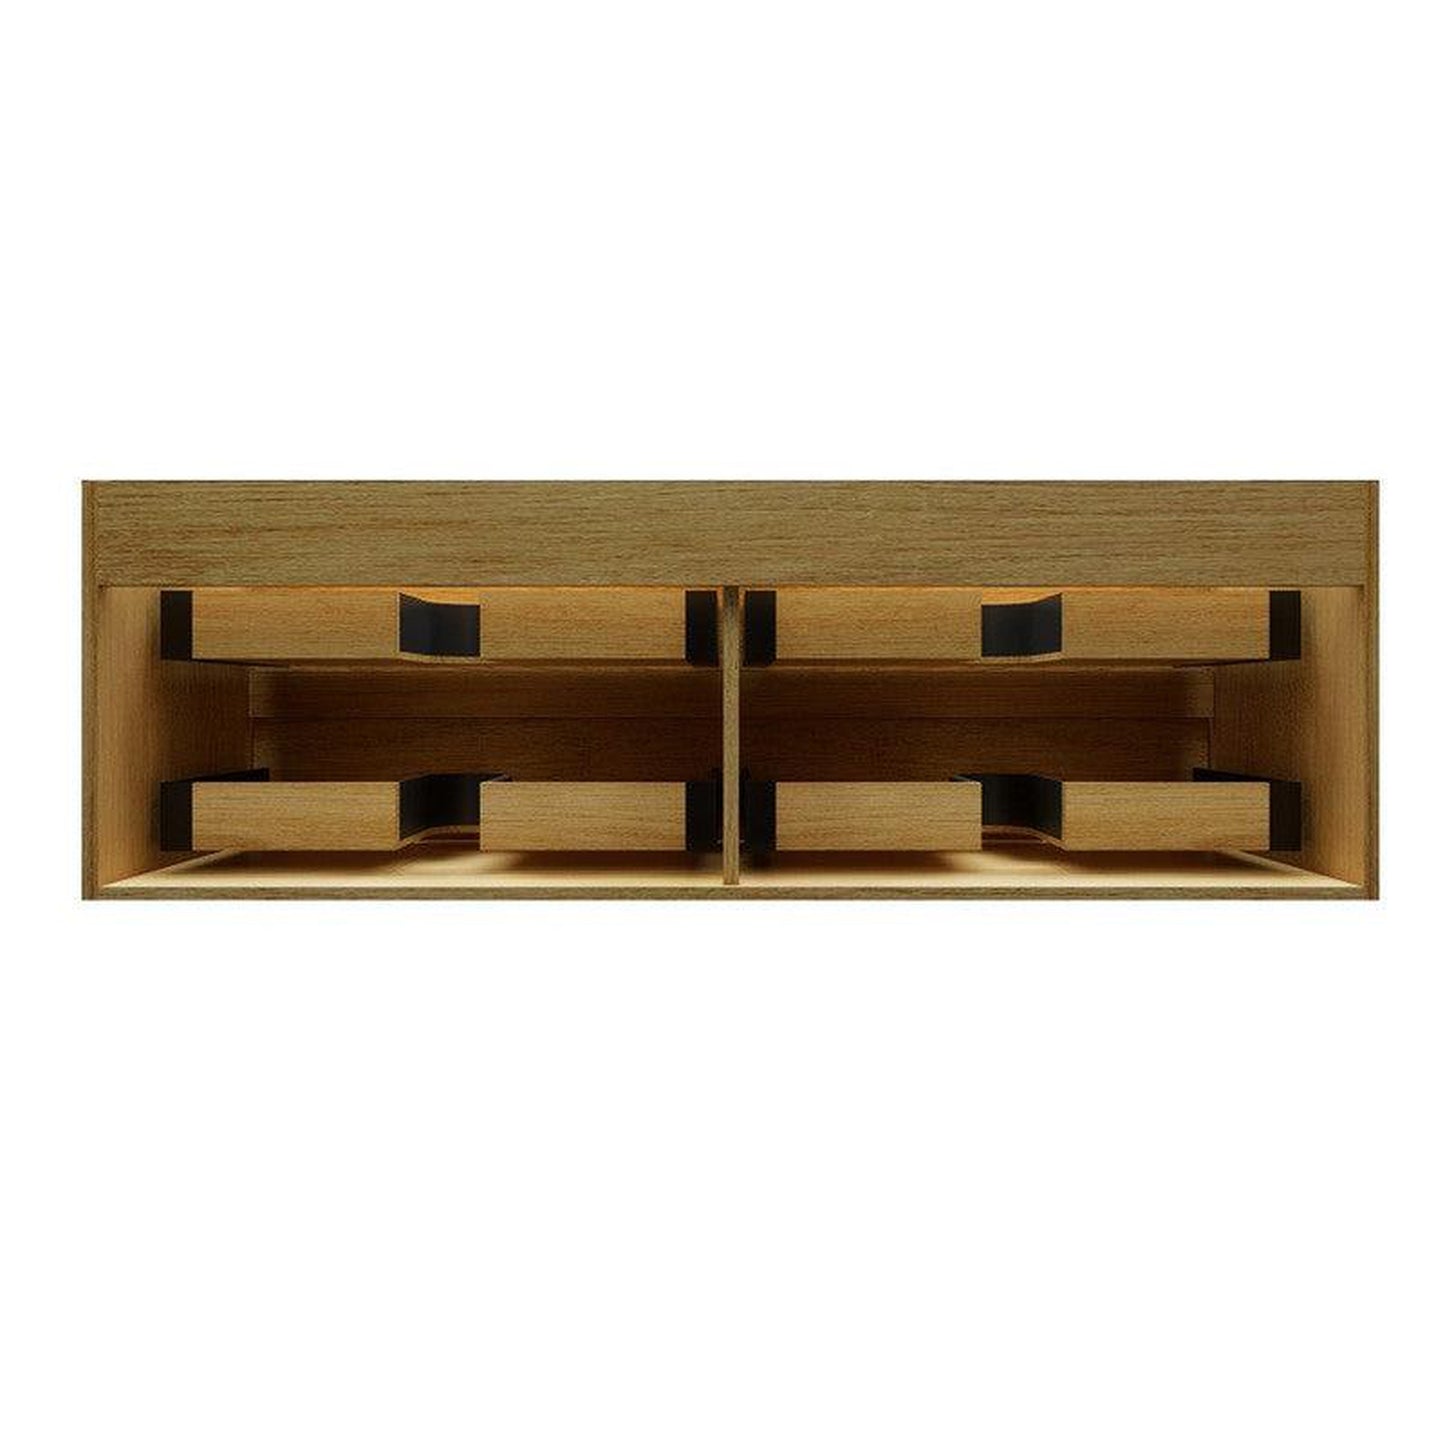 Moreno Bath MAX 60" Coffee Wood Wall-Mounted Vanity With Double Faucet Holes and Reinforced White Acrylic Sink